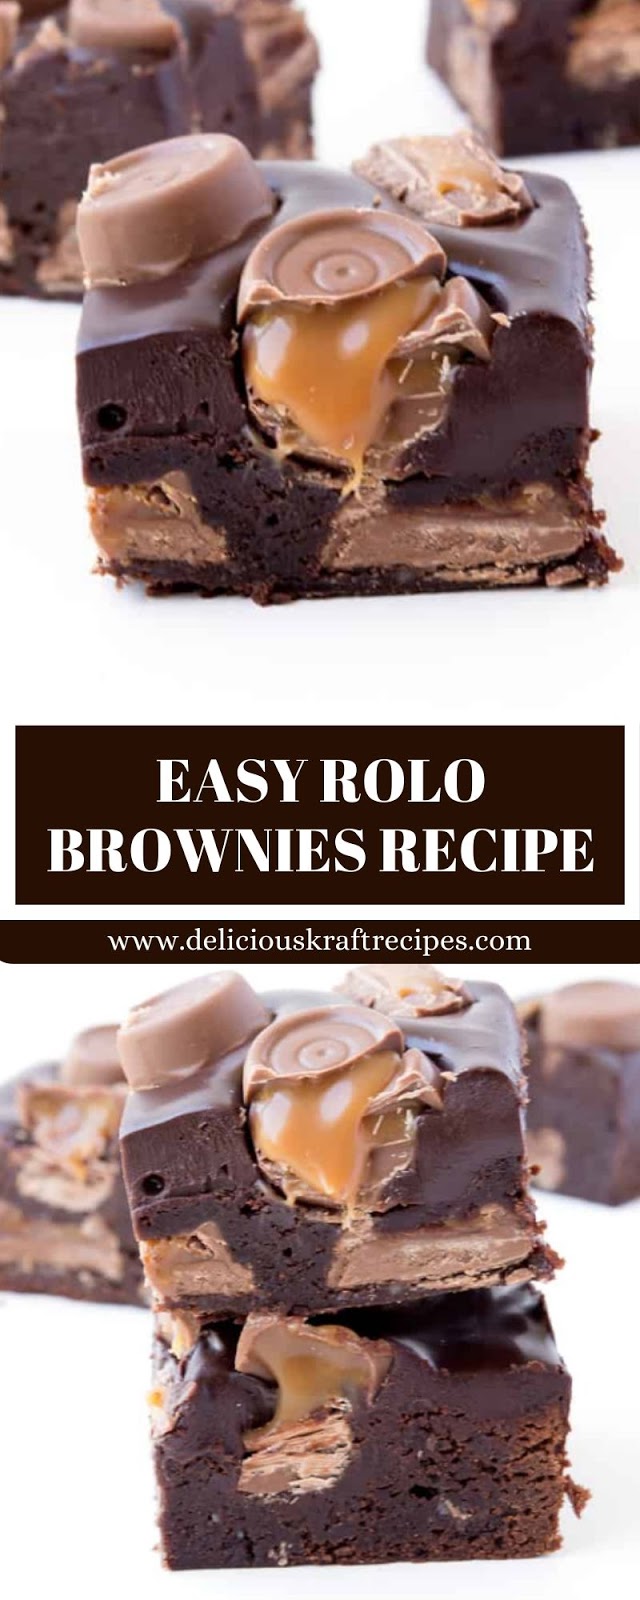 EASY ROLO BROWNIES RECIPE